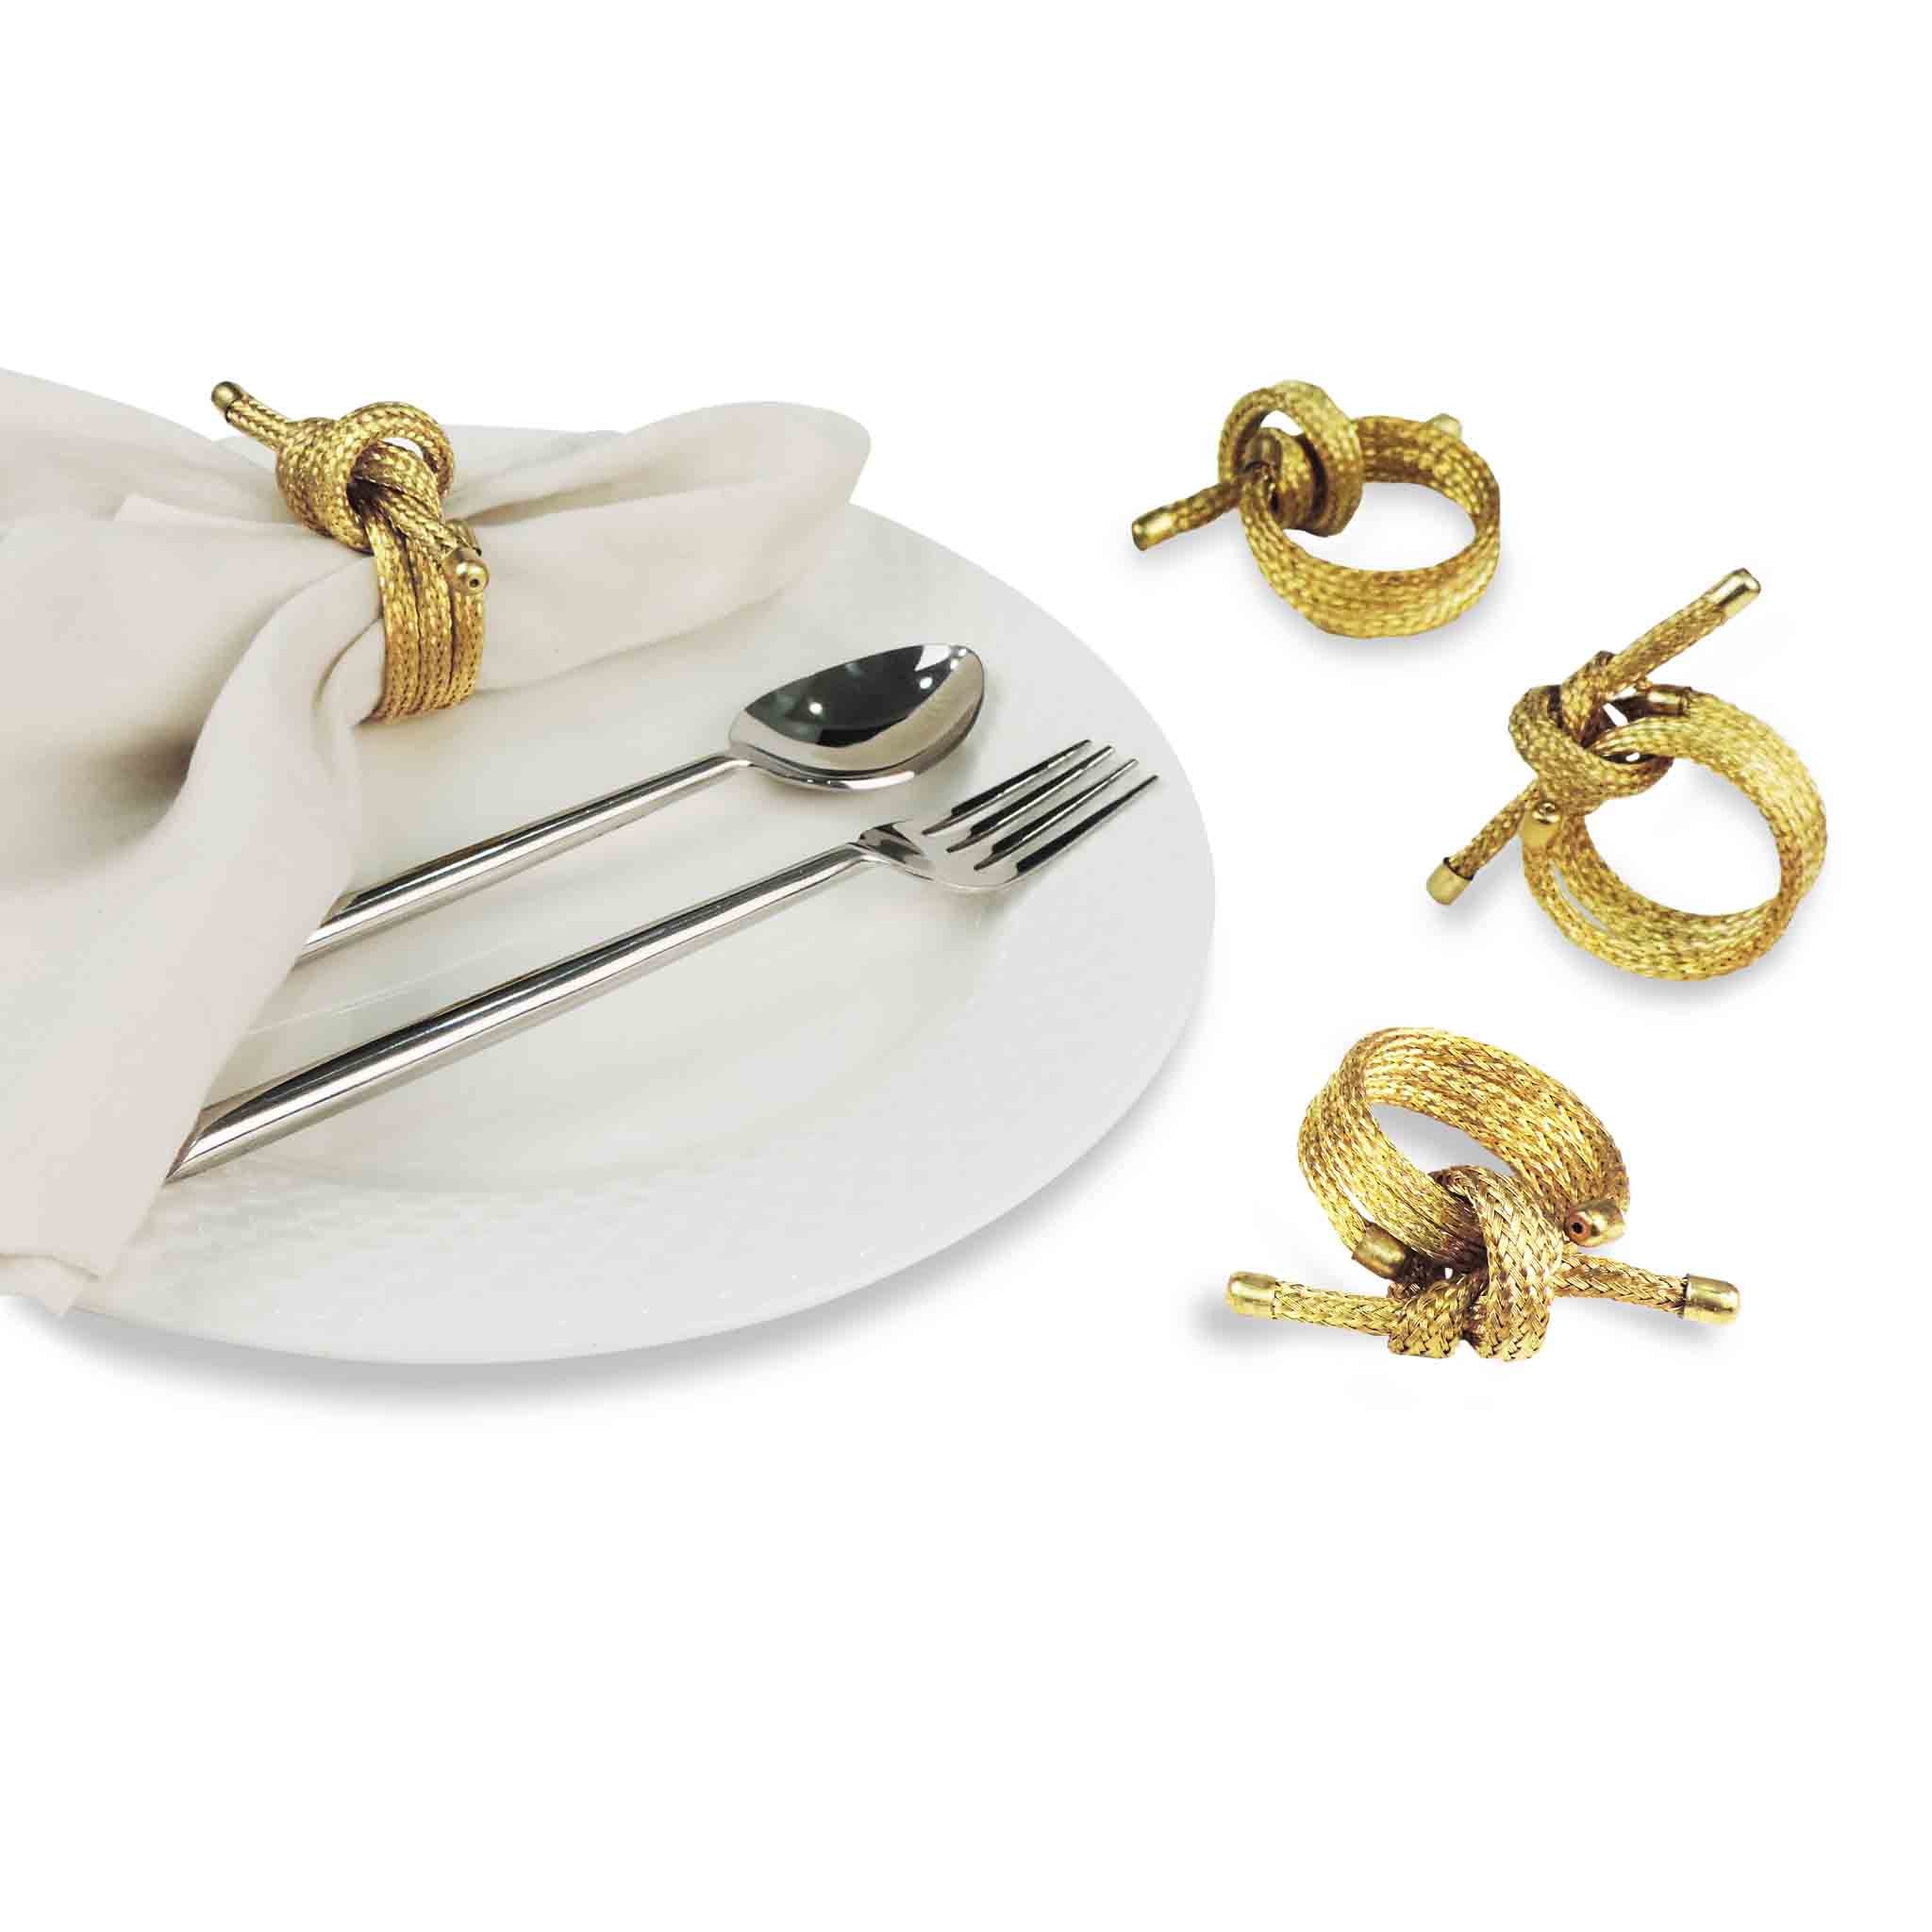 Gold Glass Bead Table Setting for 4 - Placemats, Coasters & Napkin Rings